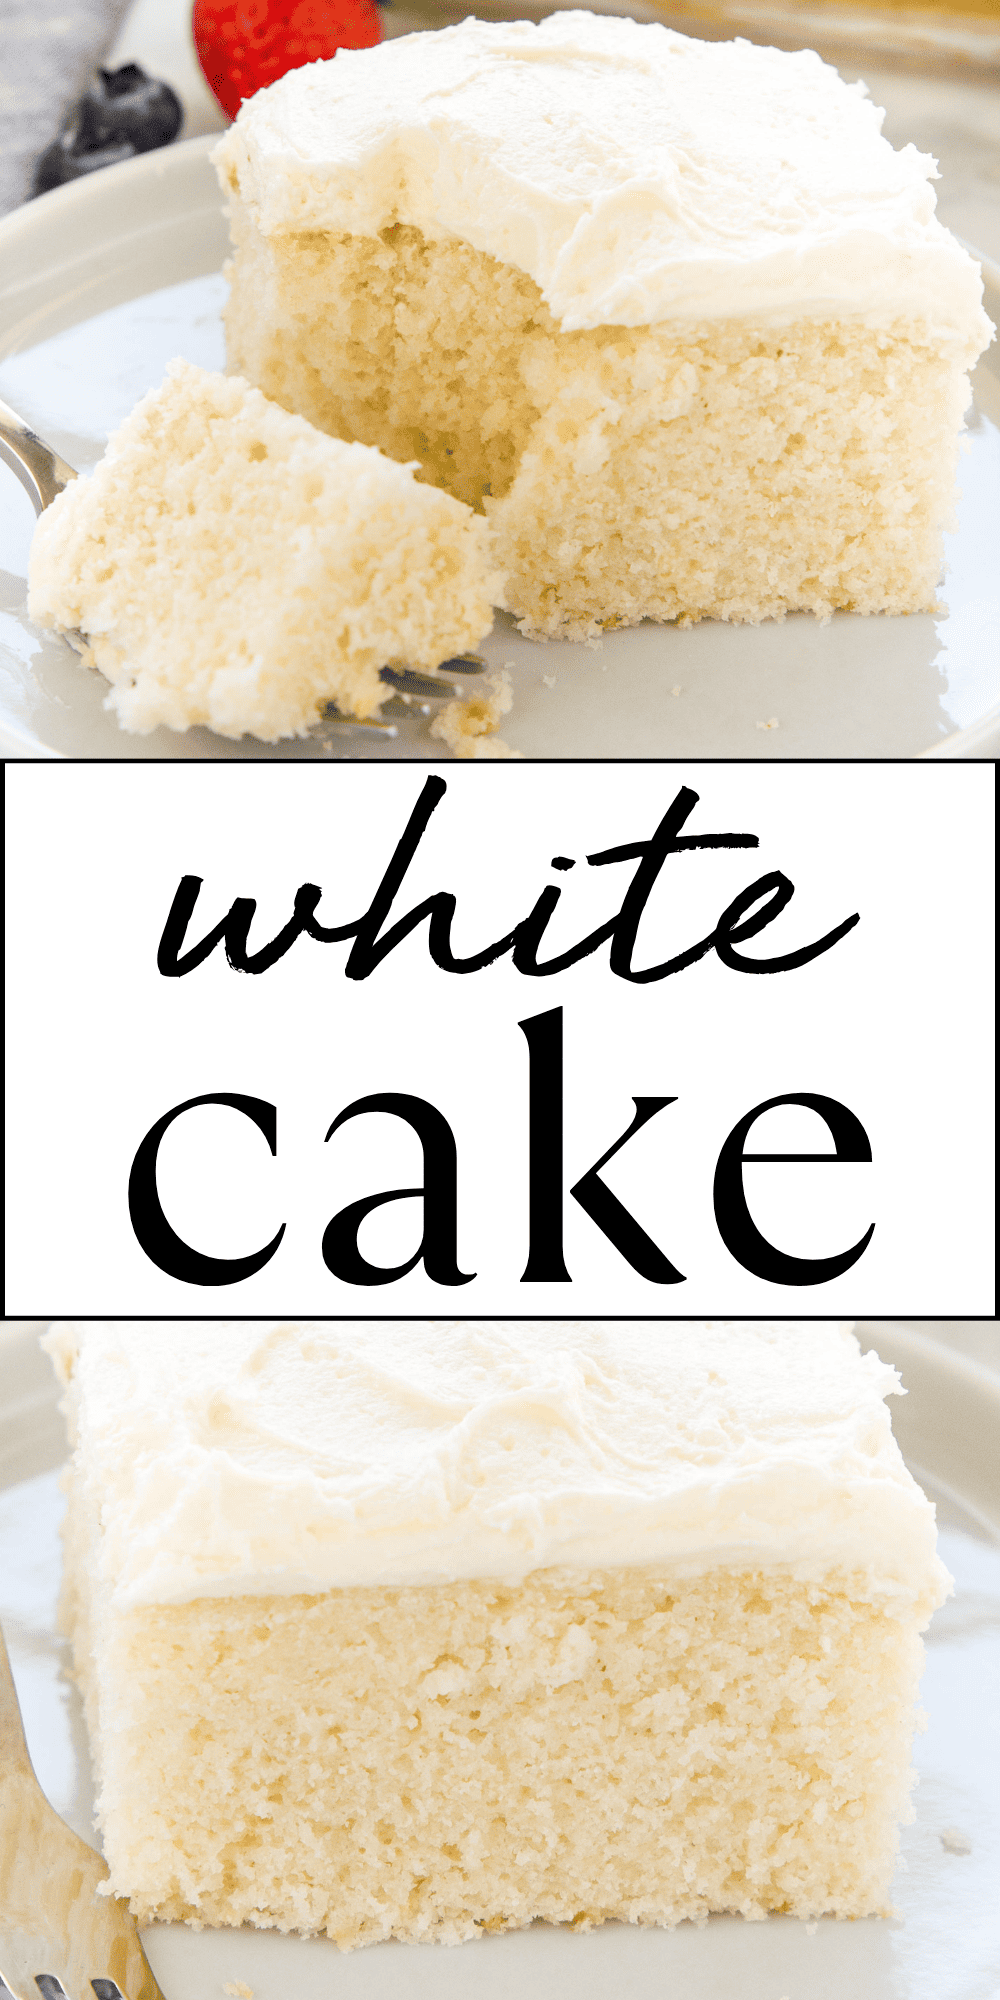 This easy White Cake recipe is the perfect white cake that's moist and tender and simple to make with am easy fluffy frosting. Learn how to make the best white cake recipe with a secret ingredient and our pro tips and tricks! Recipe from thebusybaker.ca! #whitecake #easywhitecake #howtomakewhitecake #bestwhitecakerecipe #easywhitecakerecipe #whitecakerecipe via @busybakerblog